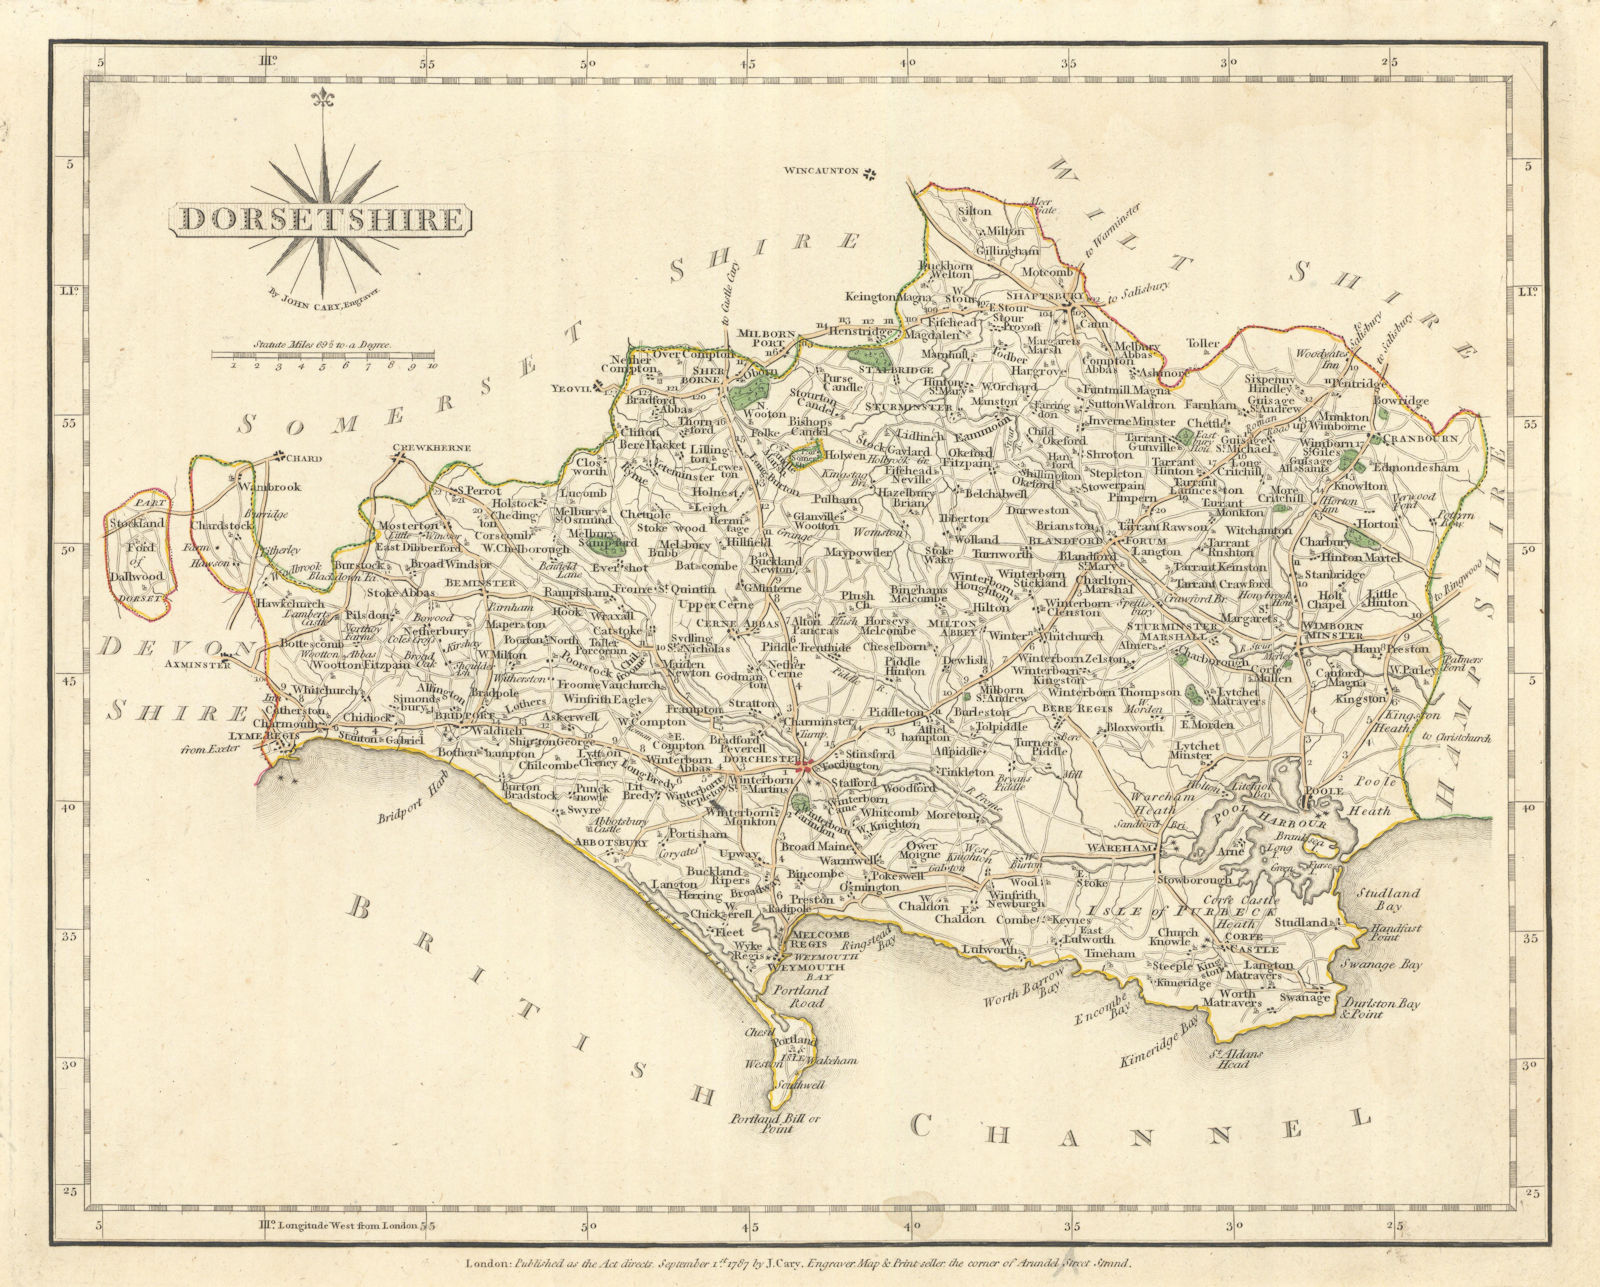 Associate Product Antique county map of DORSETSHIRE by JOHN CARY. Original outline colour 1793